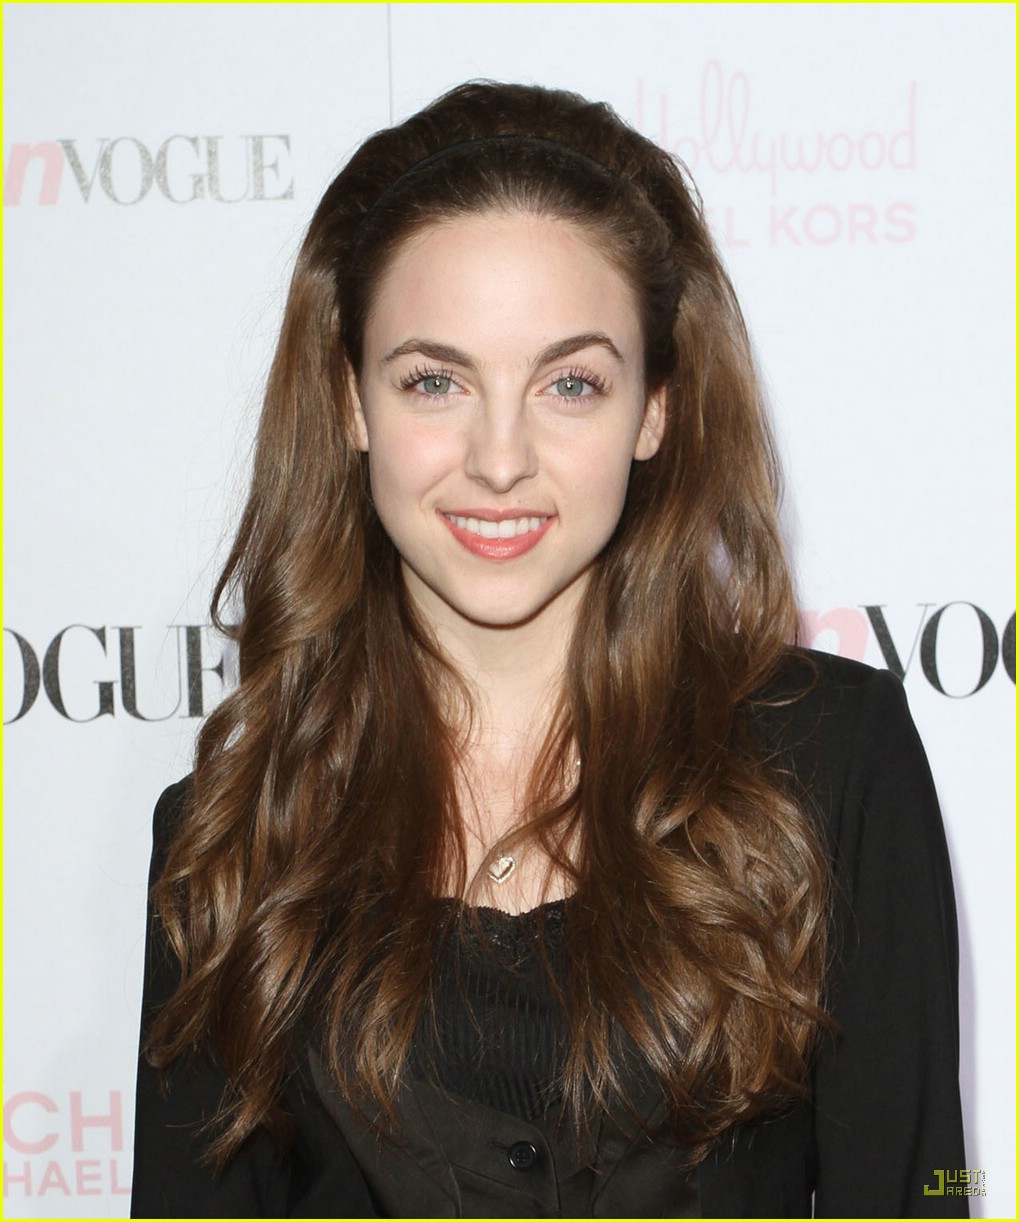 brittany curran power youth 01